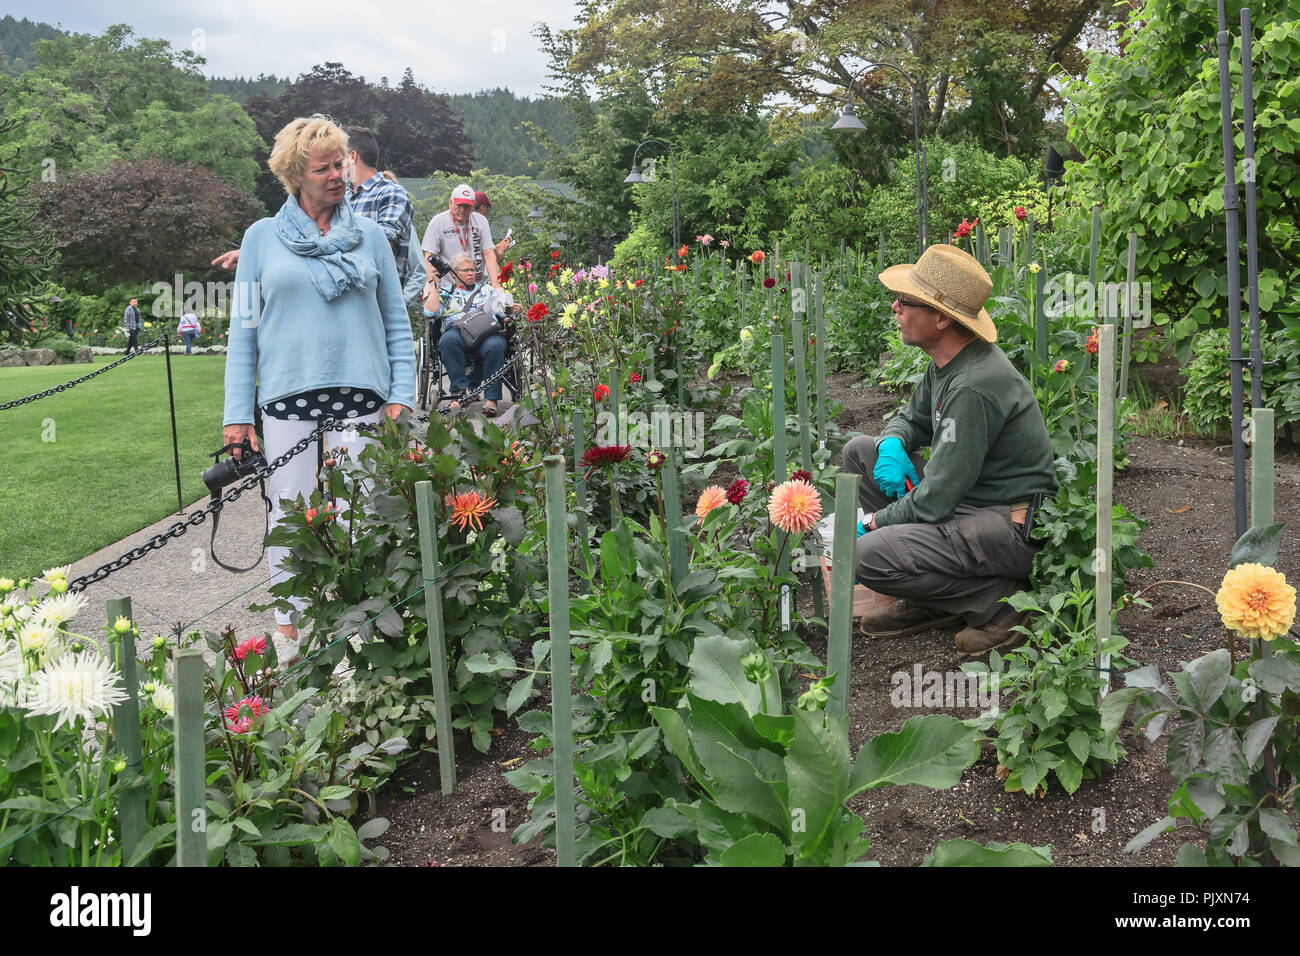 Gardener in straw hat assist visitor,The Butchart Gardens , Brentwood Bay, British Columbia, Canada Stock Photo